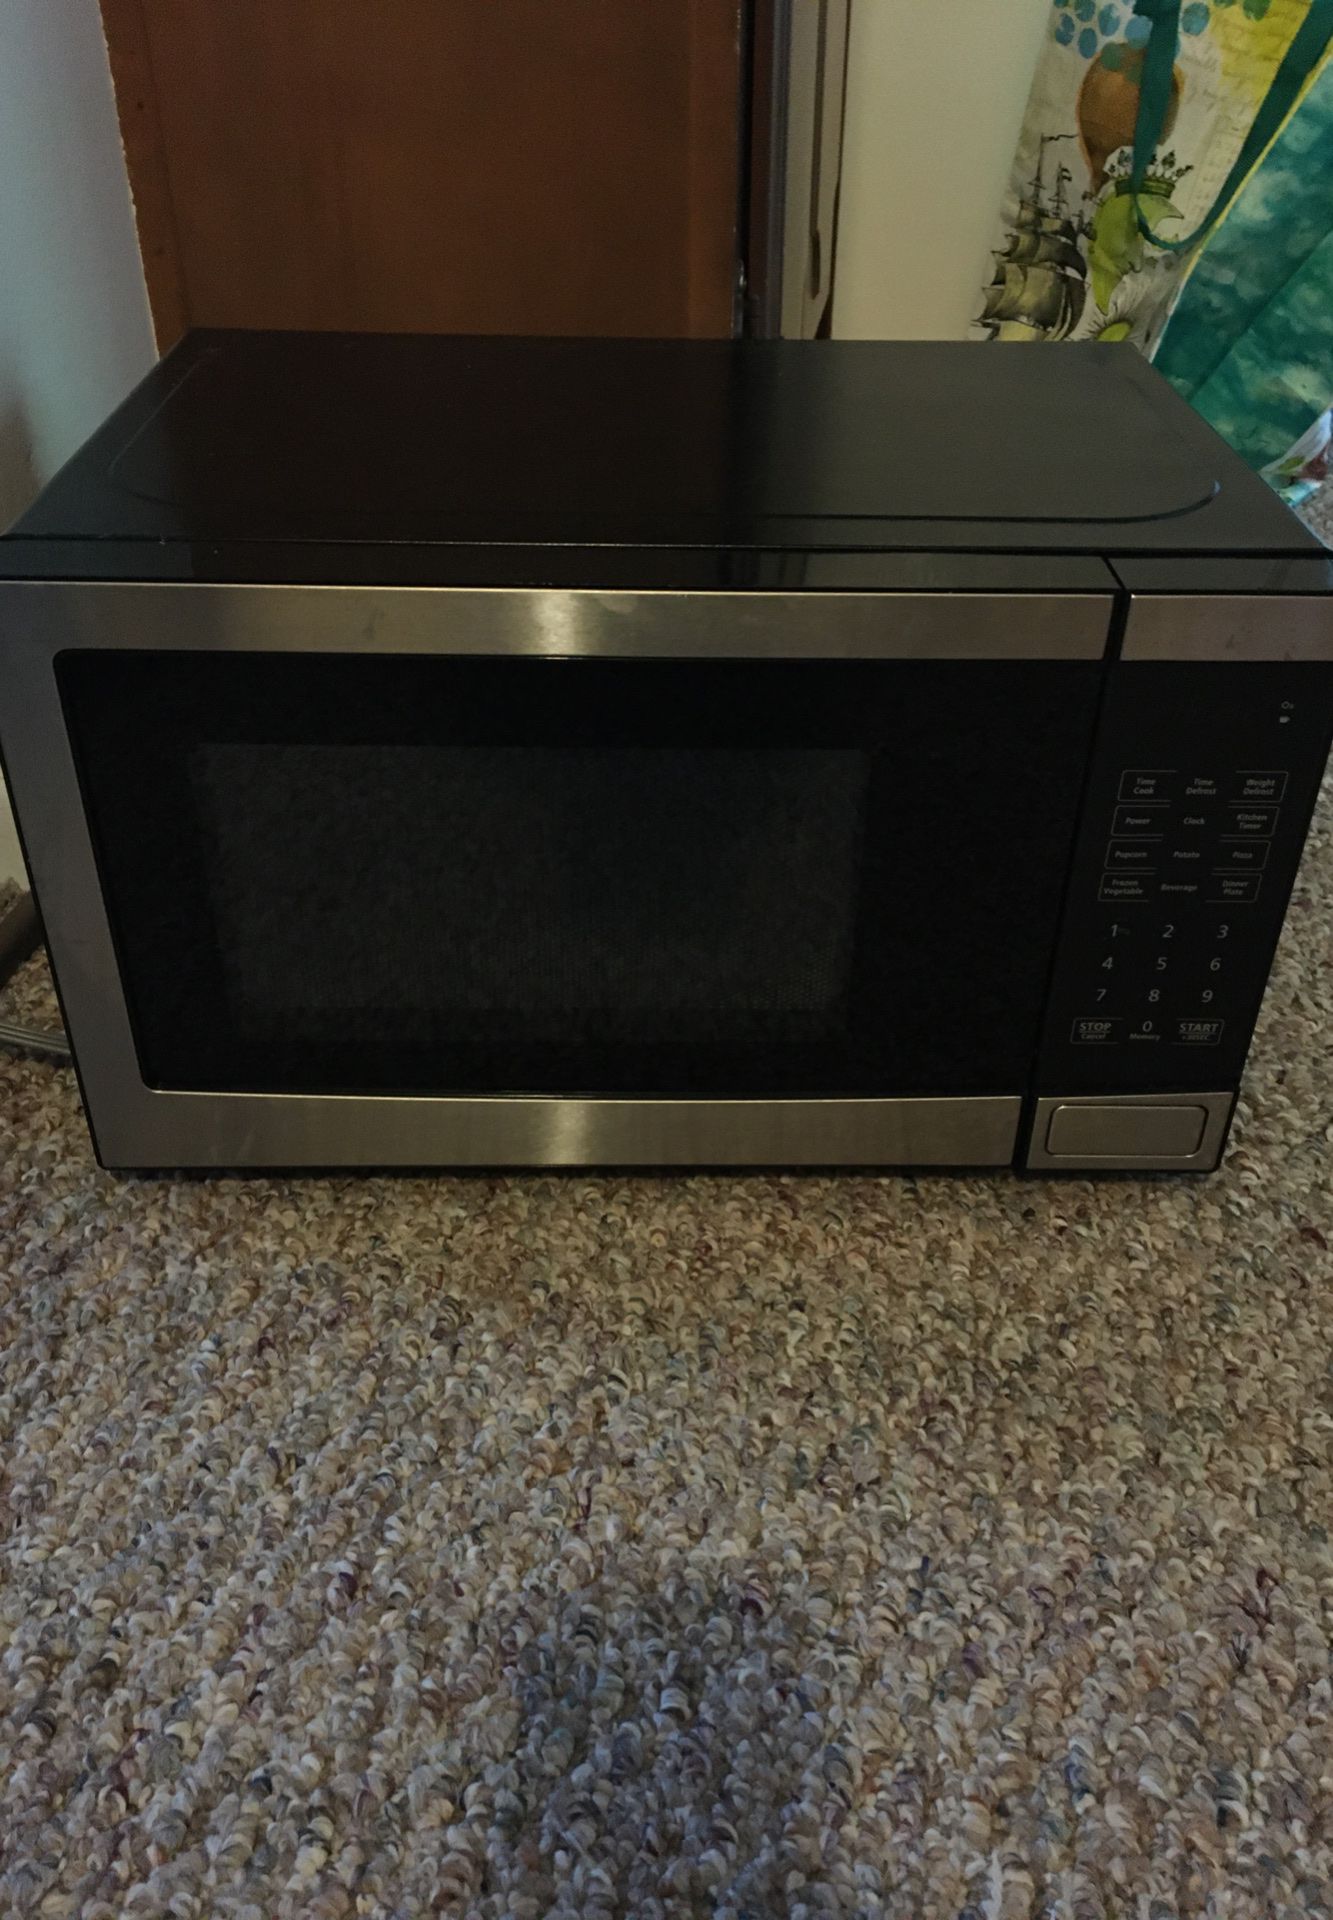 Microwave- if posted it’s available